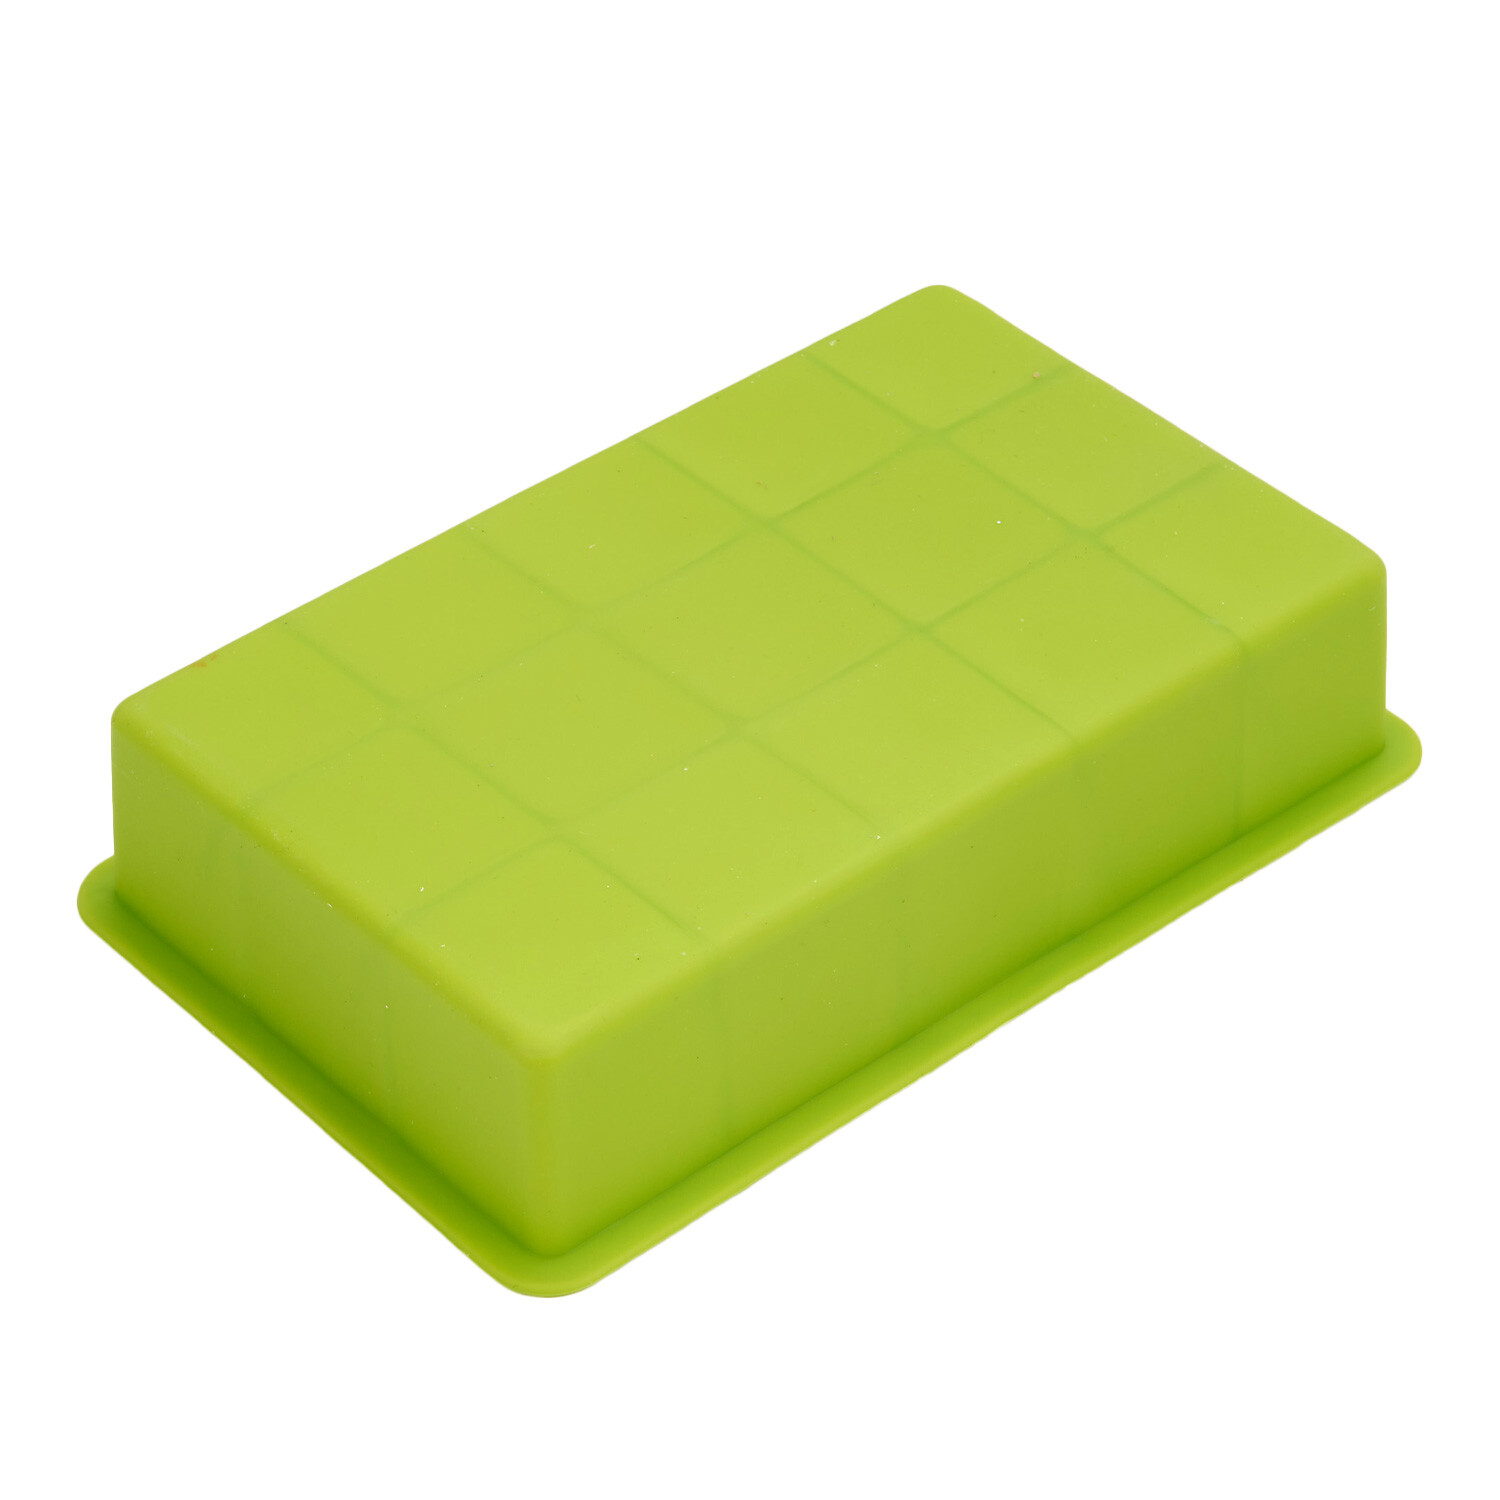 Square Silicone Ice Cube Mould - Green Image 4